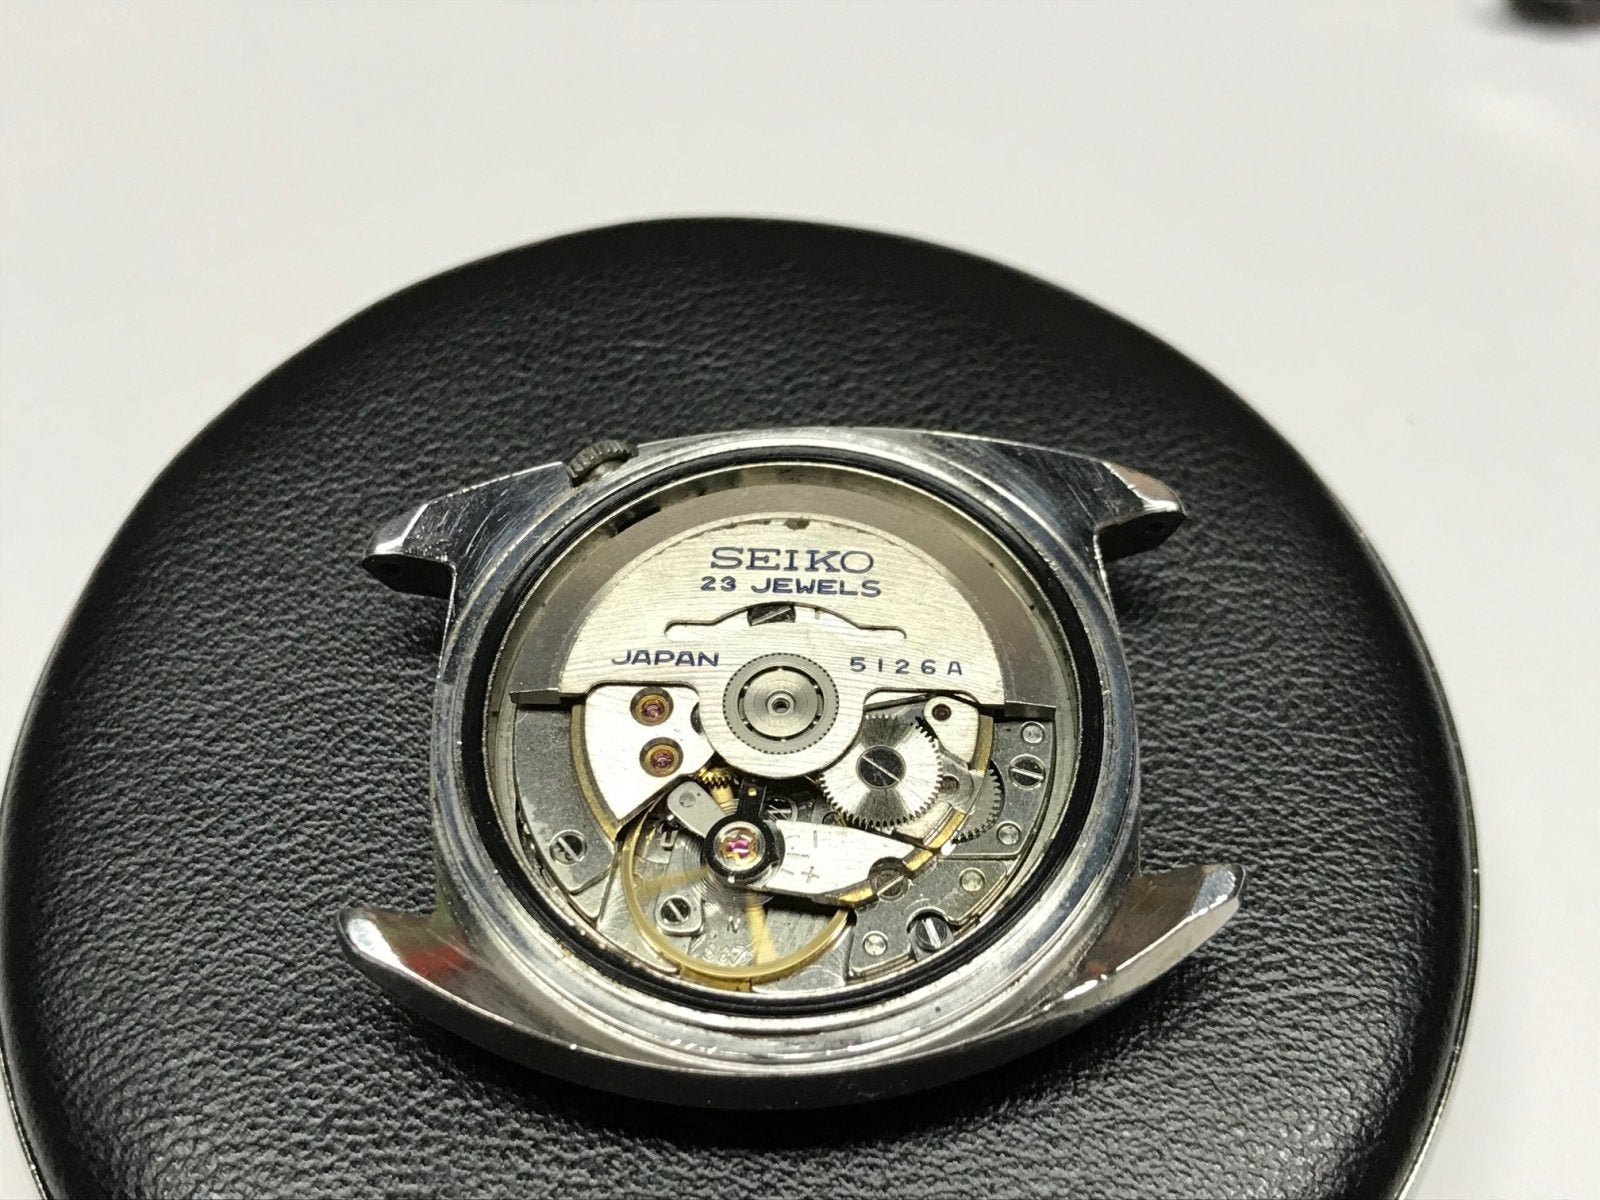 Project Restoration/Build - 1968 Seiko 5126-7000 | The Watch Site